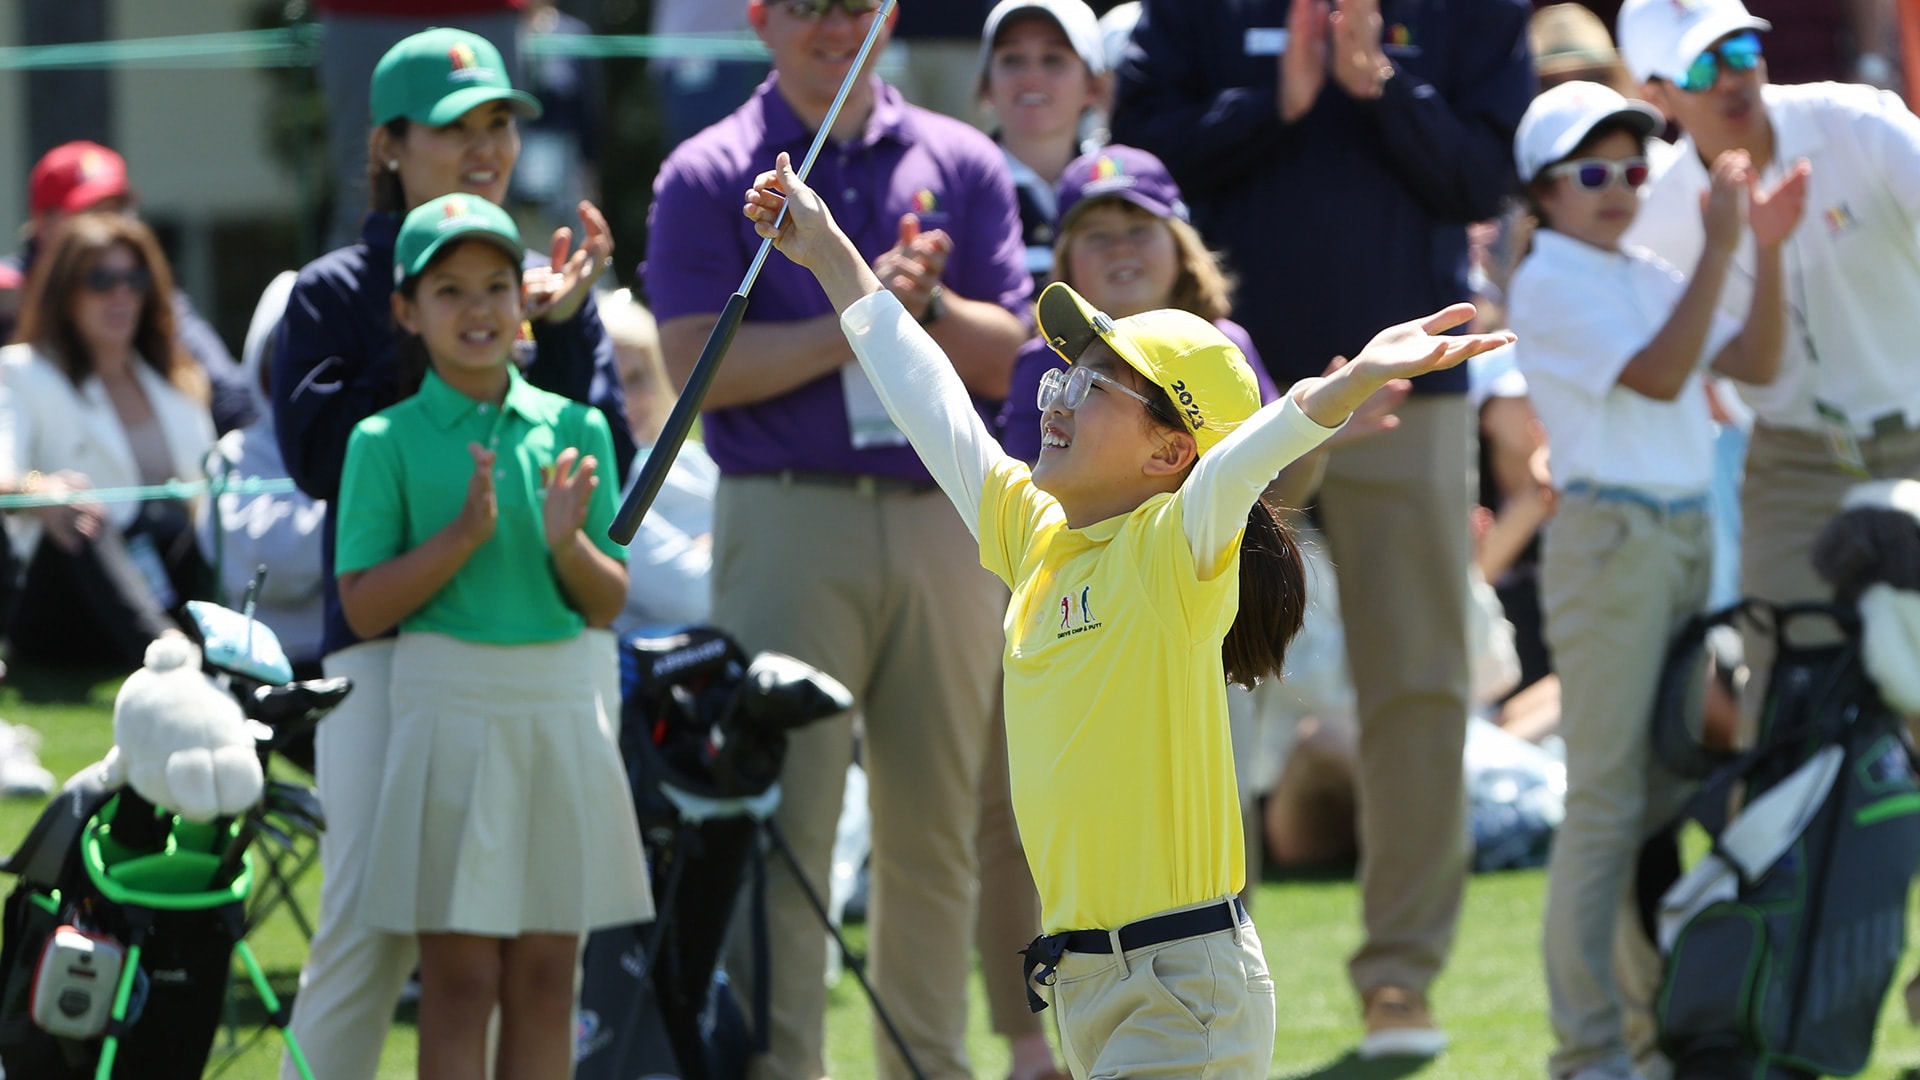 2023 Masters: Augusta National’s Sunday before the Masters unlike any other in golf